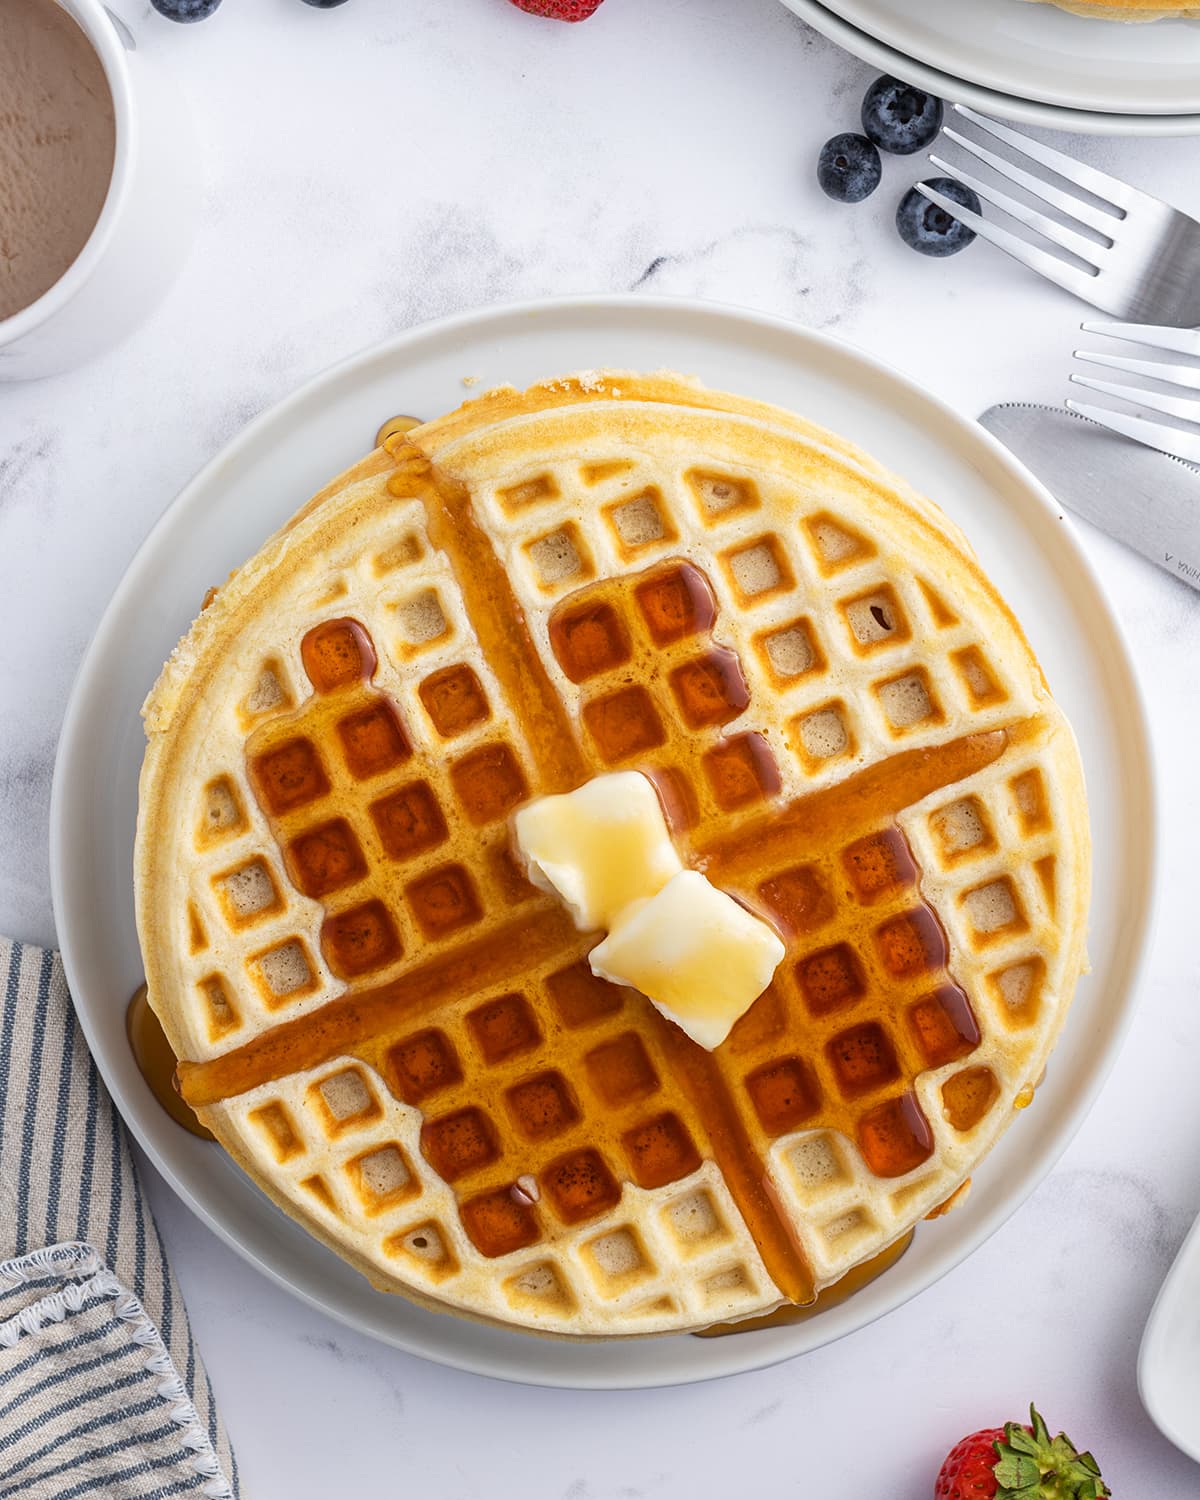 An overhead photo of a plate of waffles topped with butter squares and syrup.